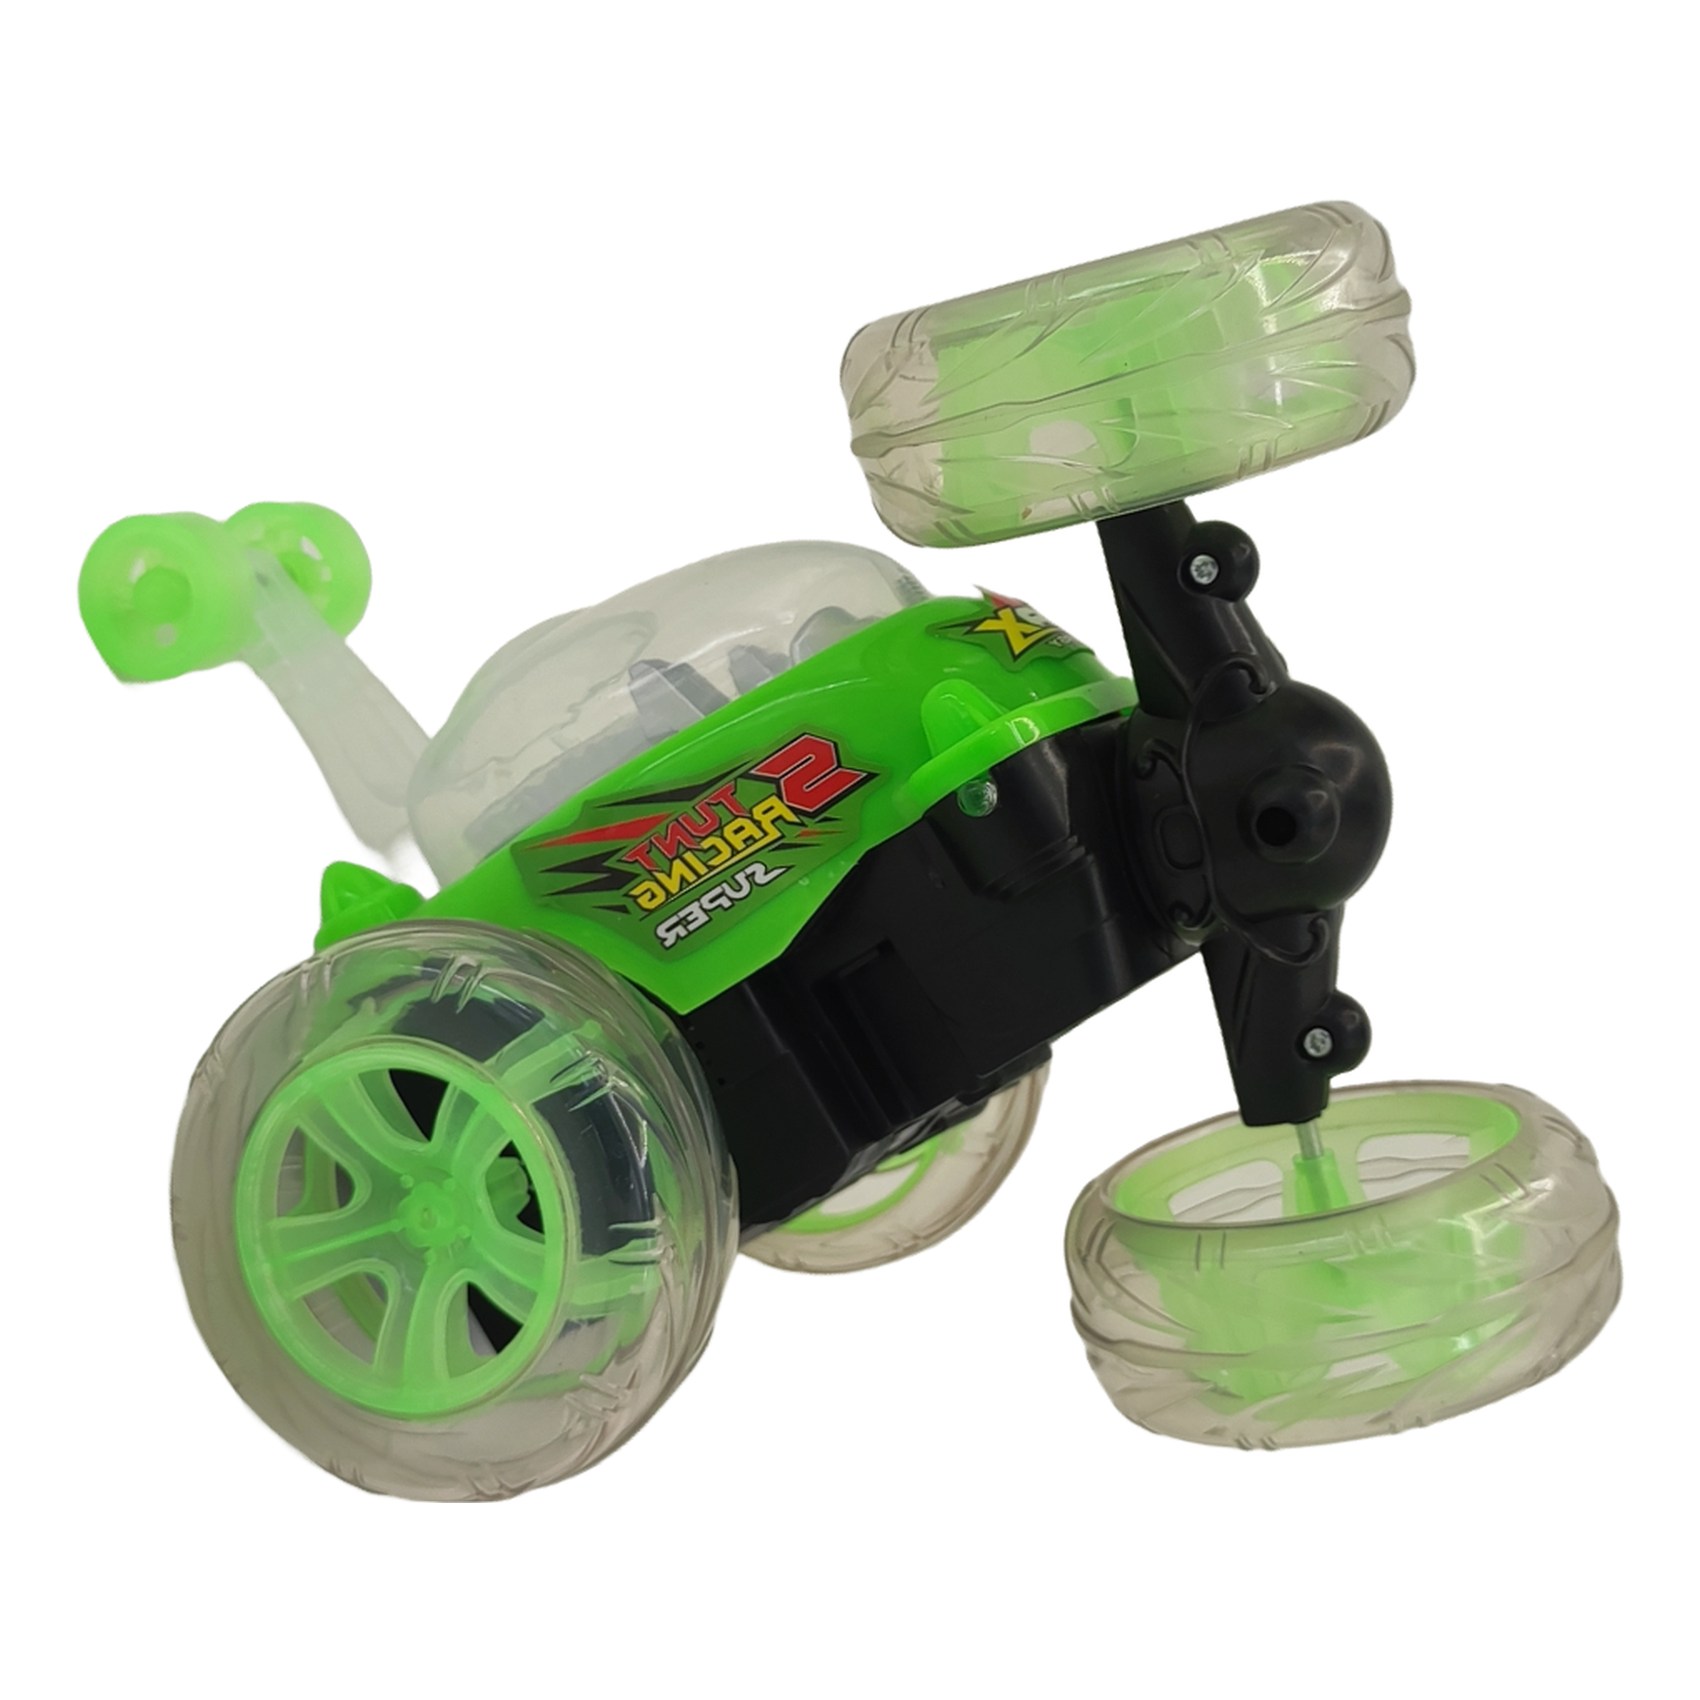 Great Universe Toon Toyz Light and Music Remote Control Tipping Stunt Car